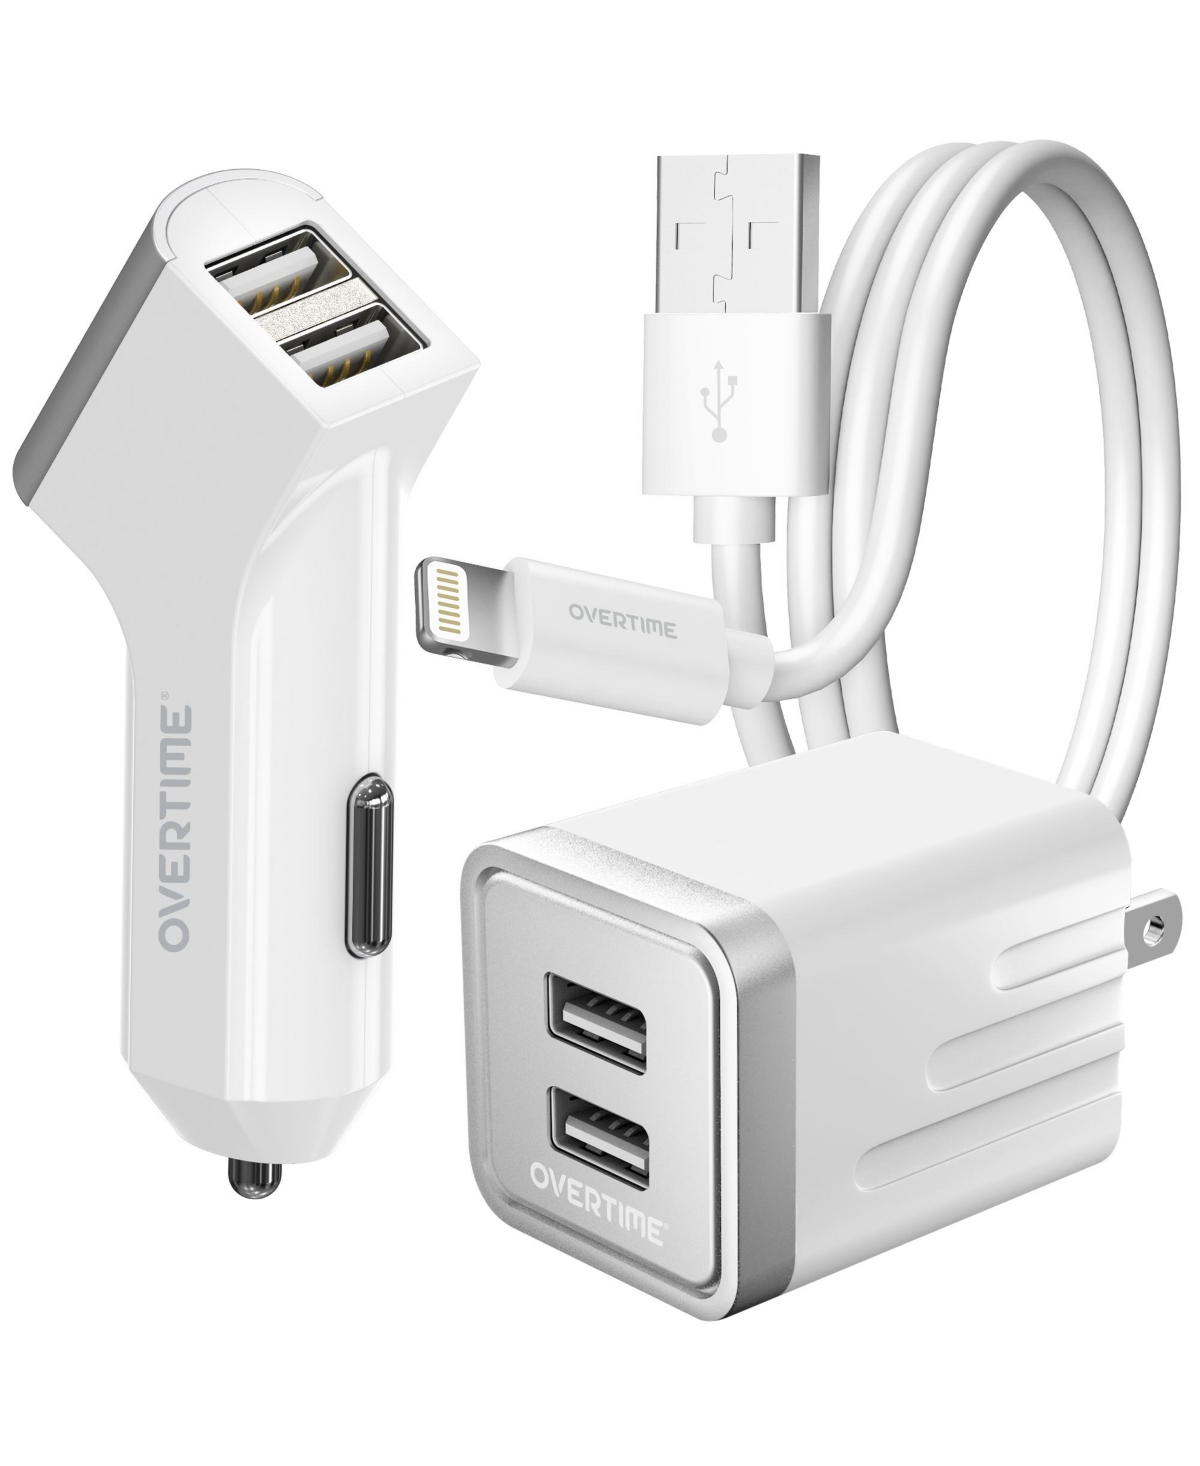 UPC 802029063475 product image for Overtime Apple MFi Certified 3PC iPhone Charging Set for Home, Office, and Car I | upcitemdb.com